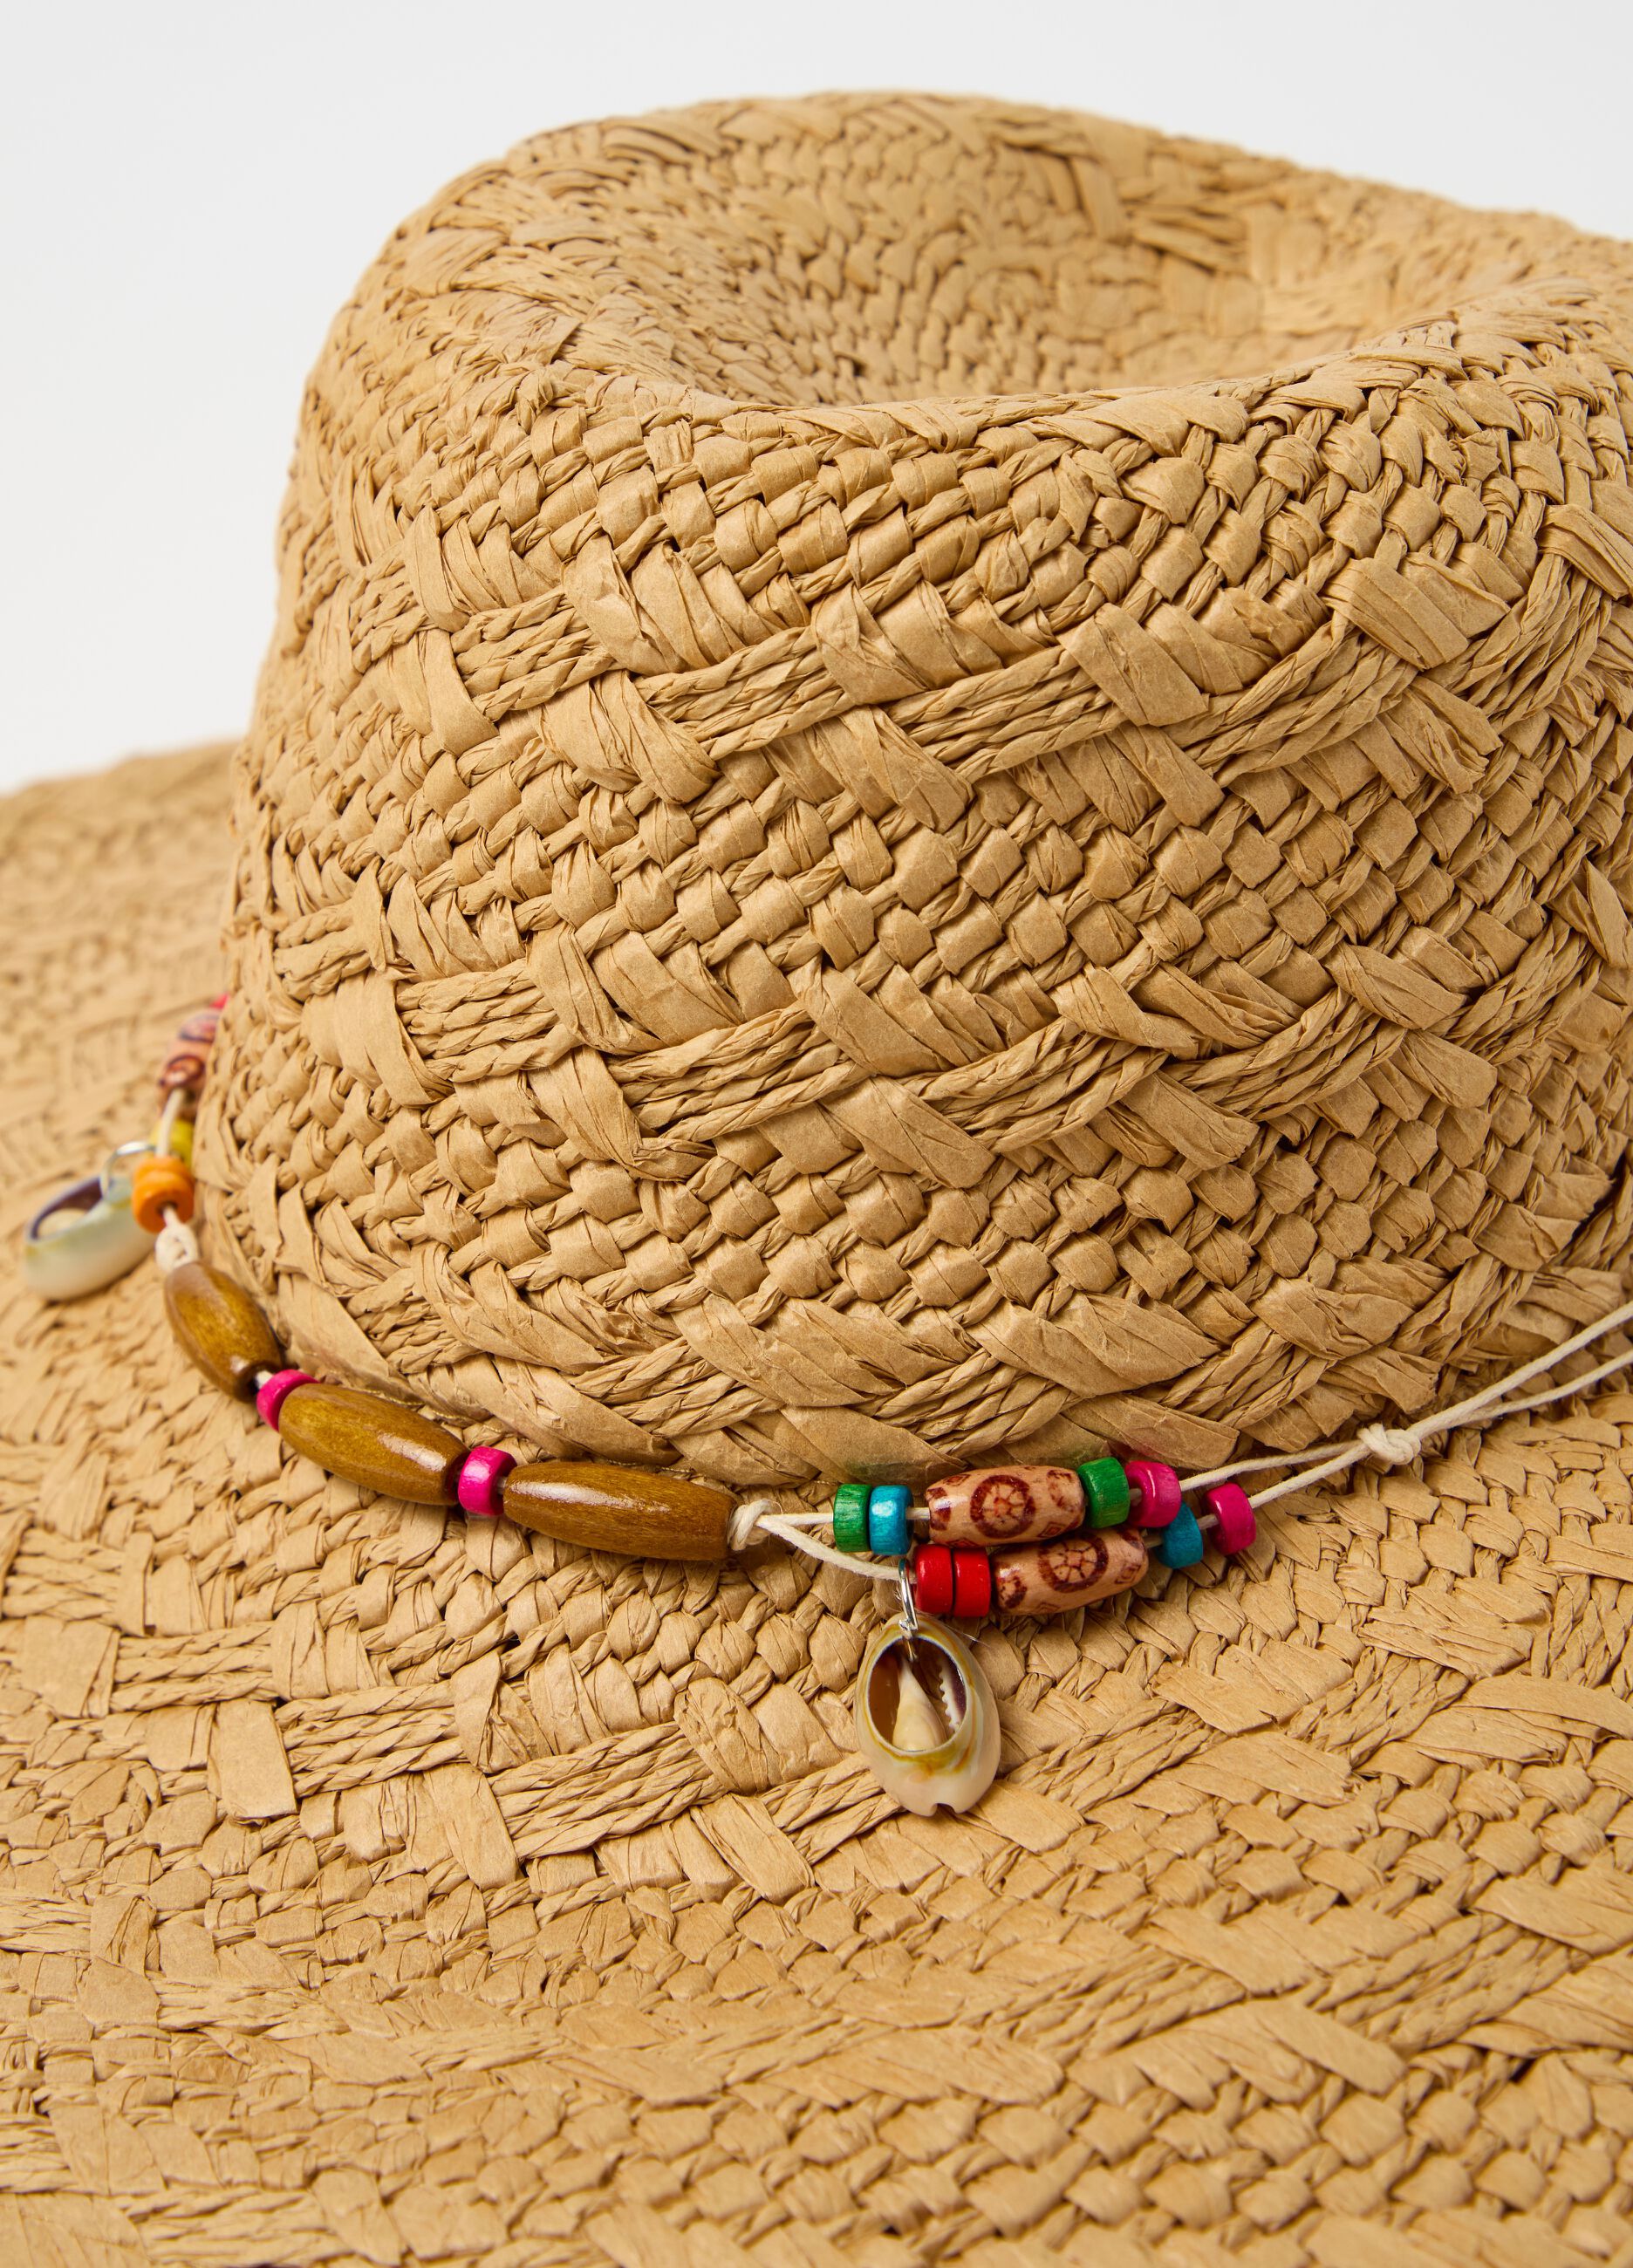 Straw hat with decorations